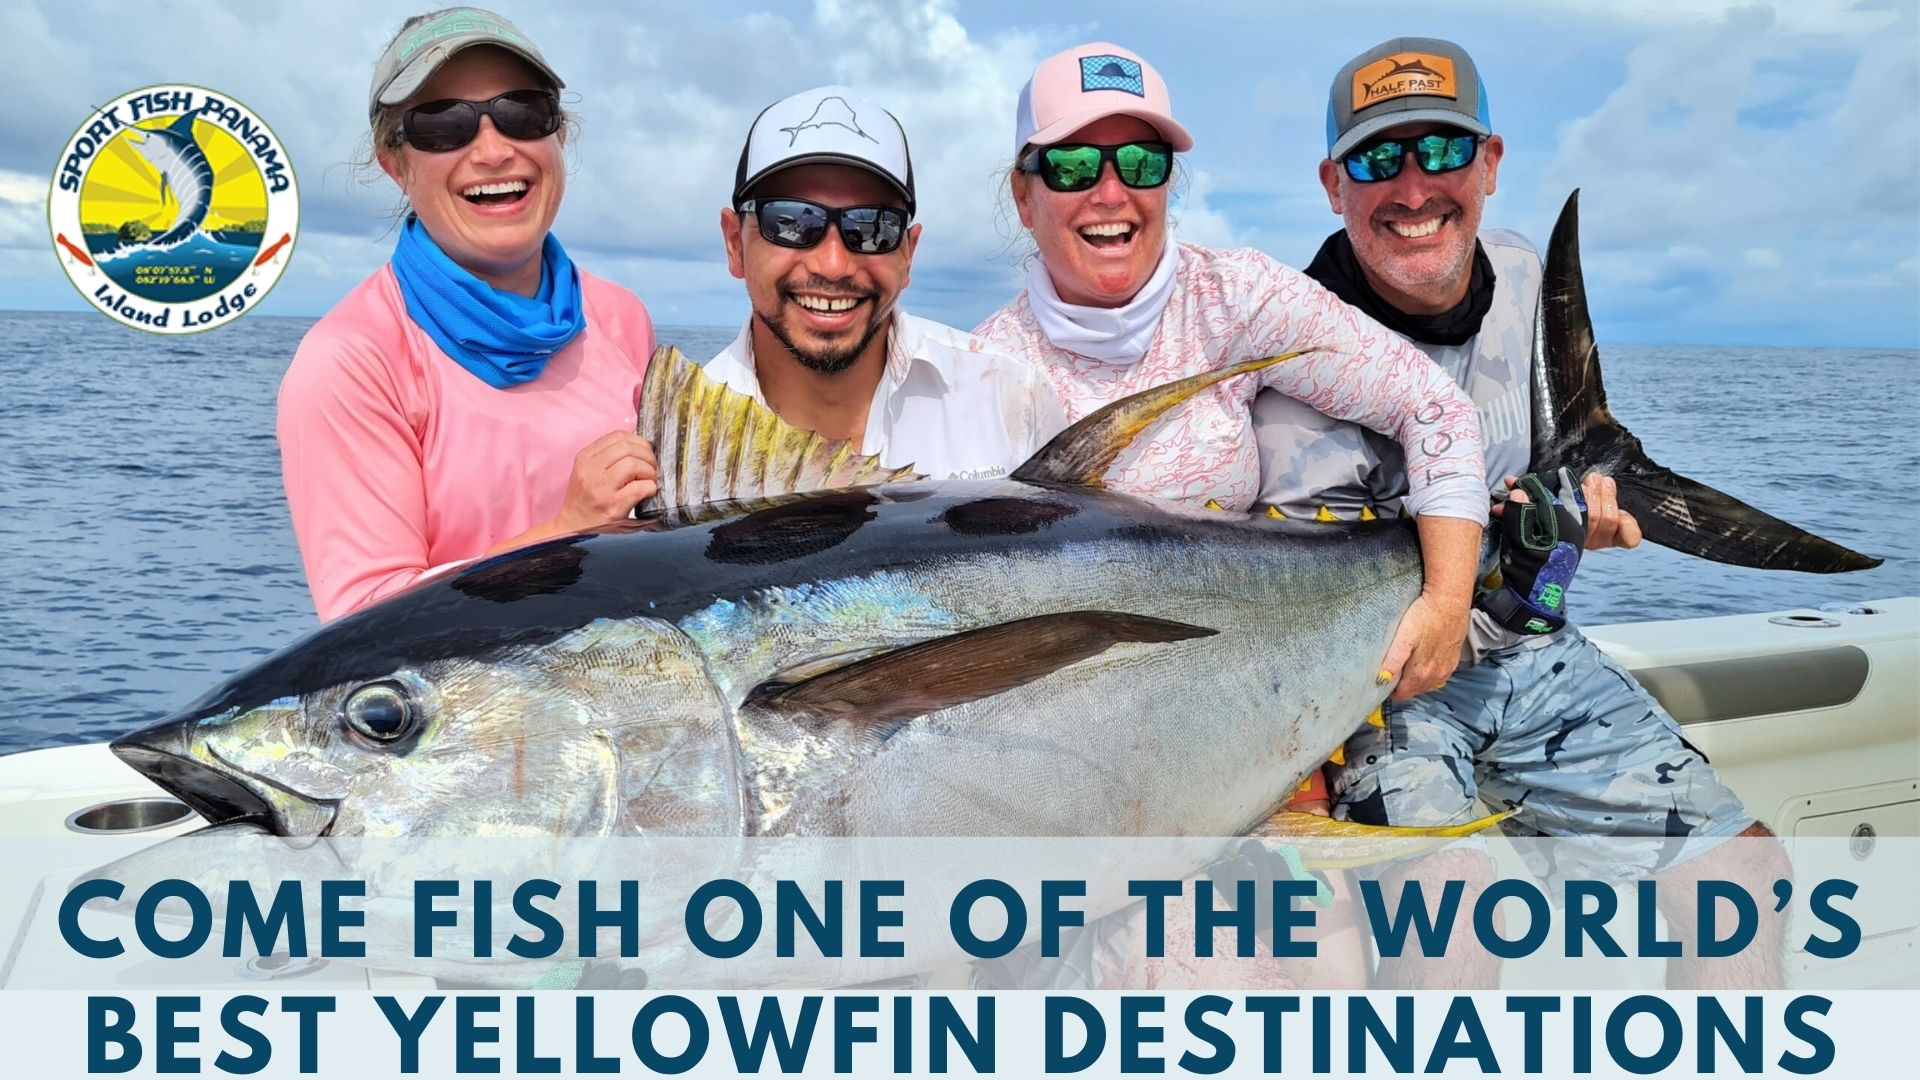 Come Fish One of The World’s Best Yellowfin Tuna Destinations